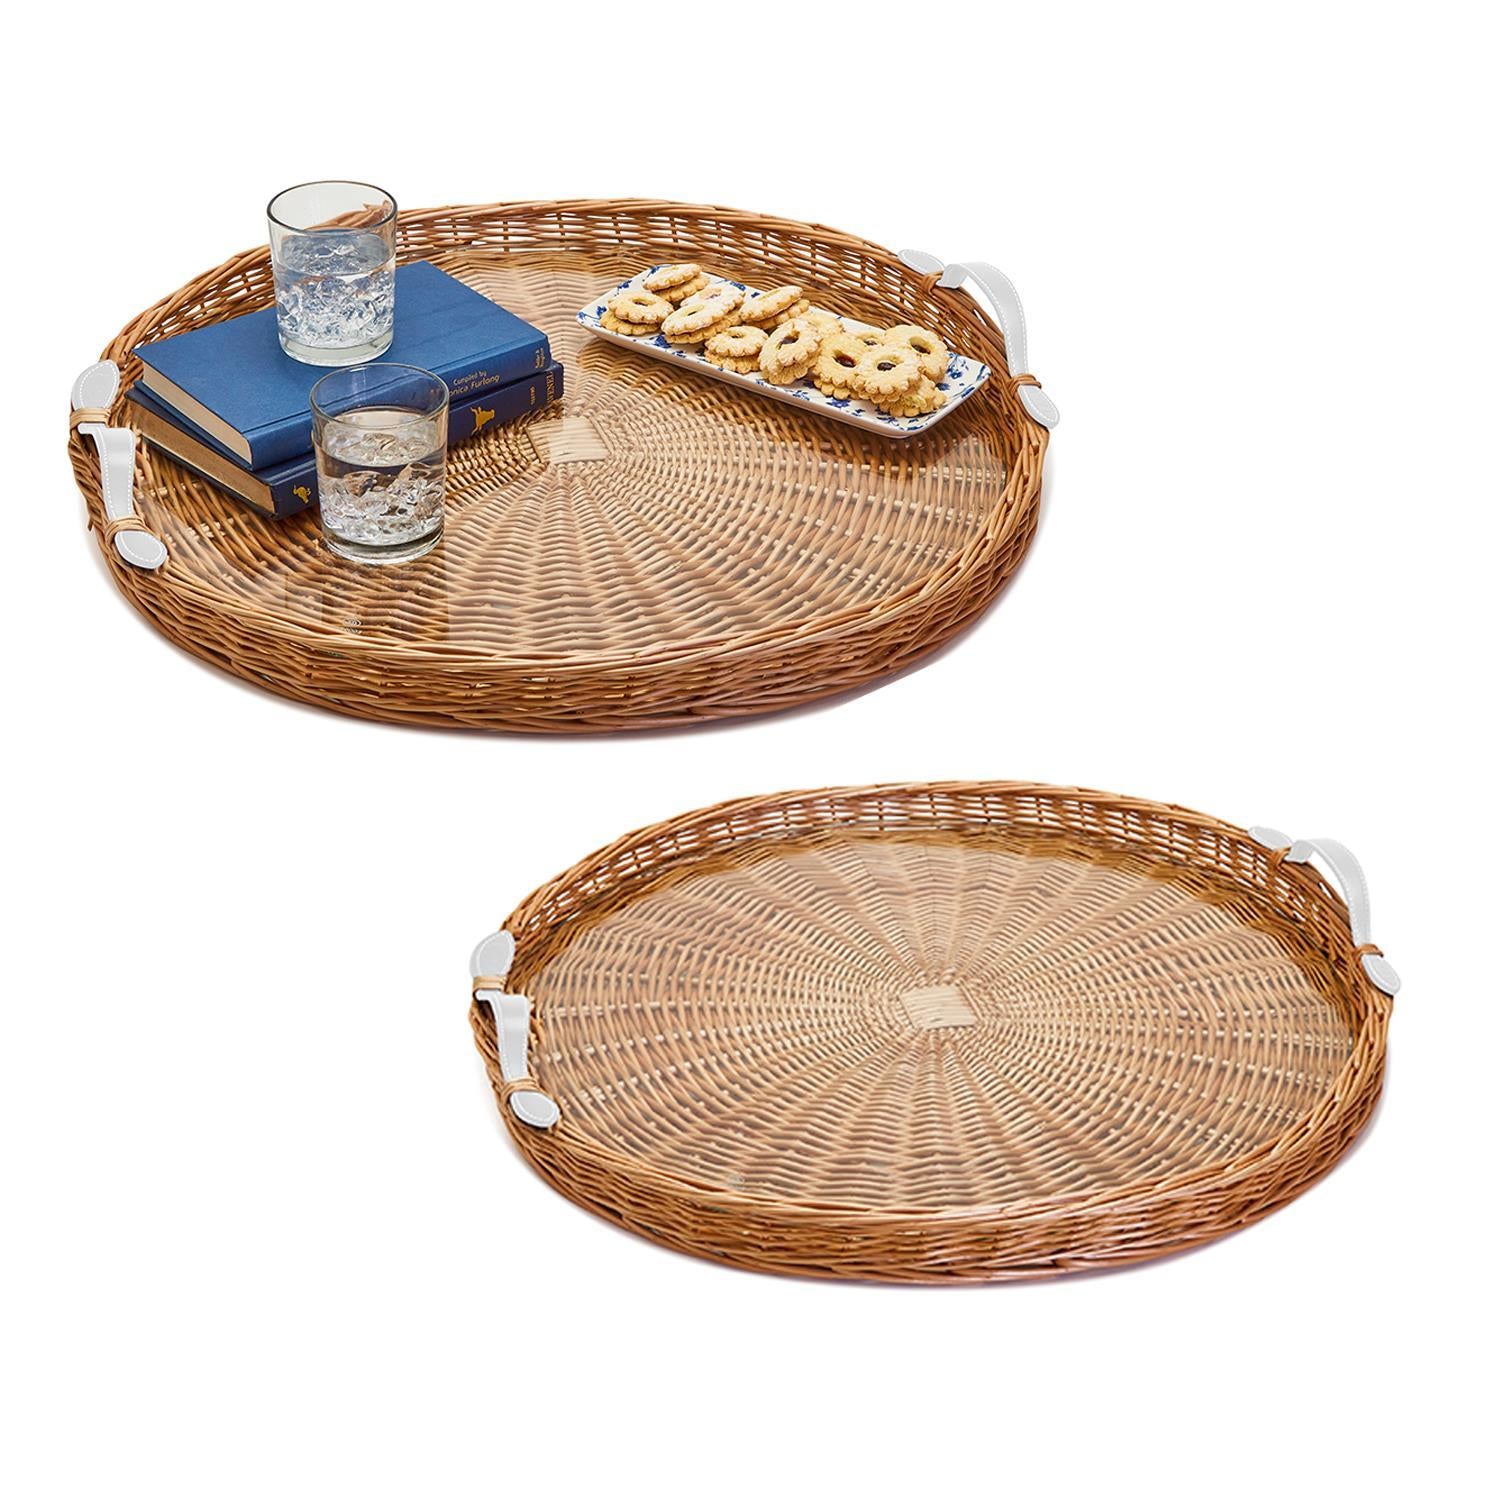 ROUND WICKER TRAY WITH HANDLES-LG